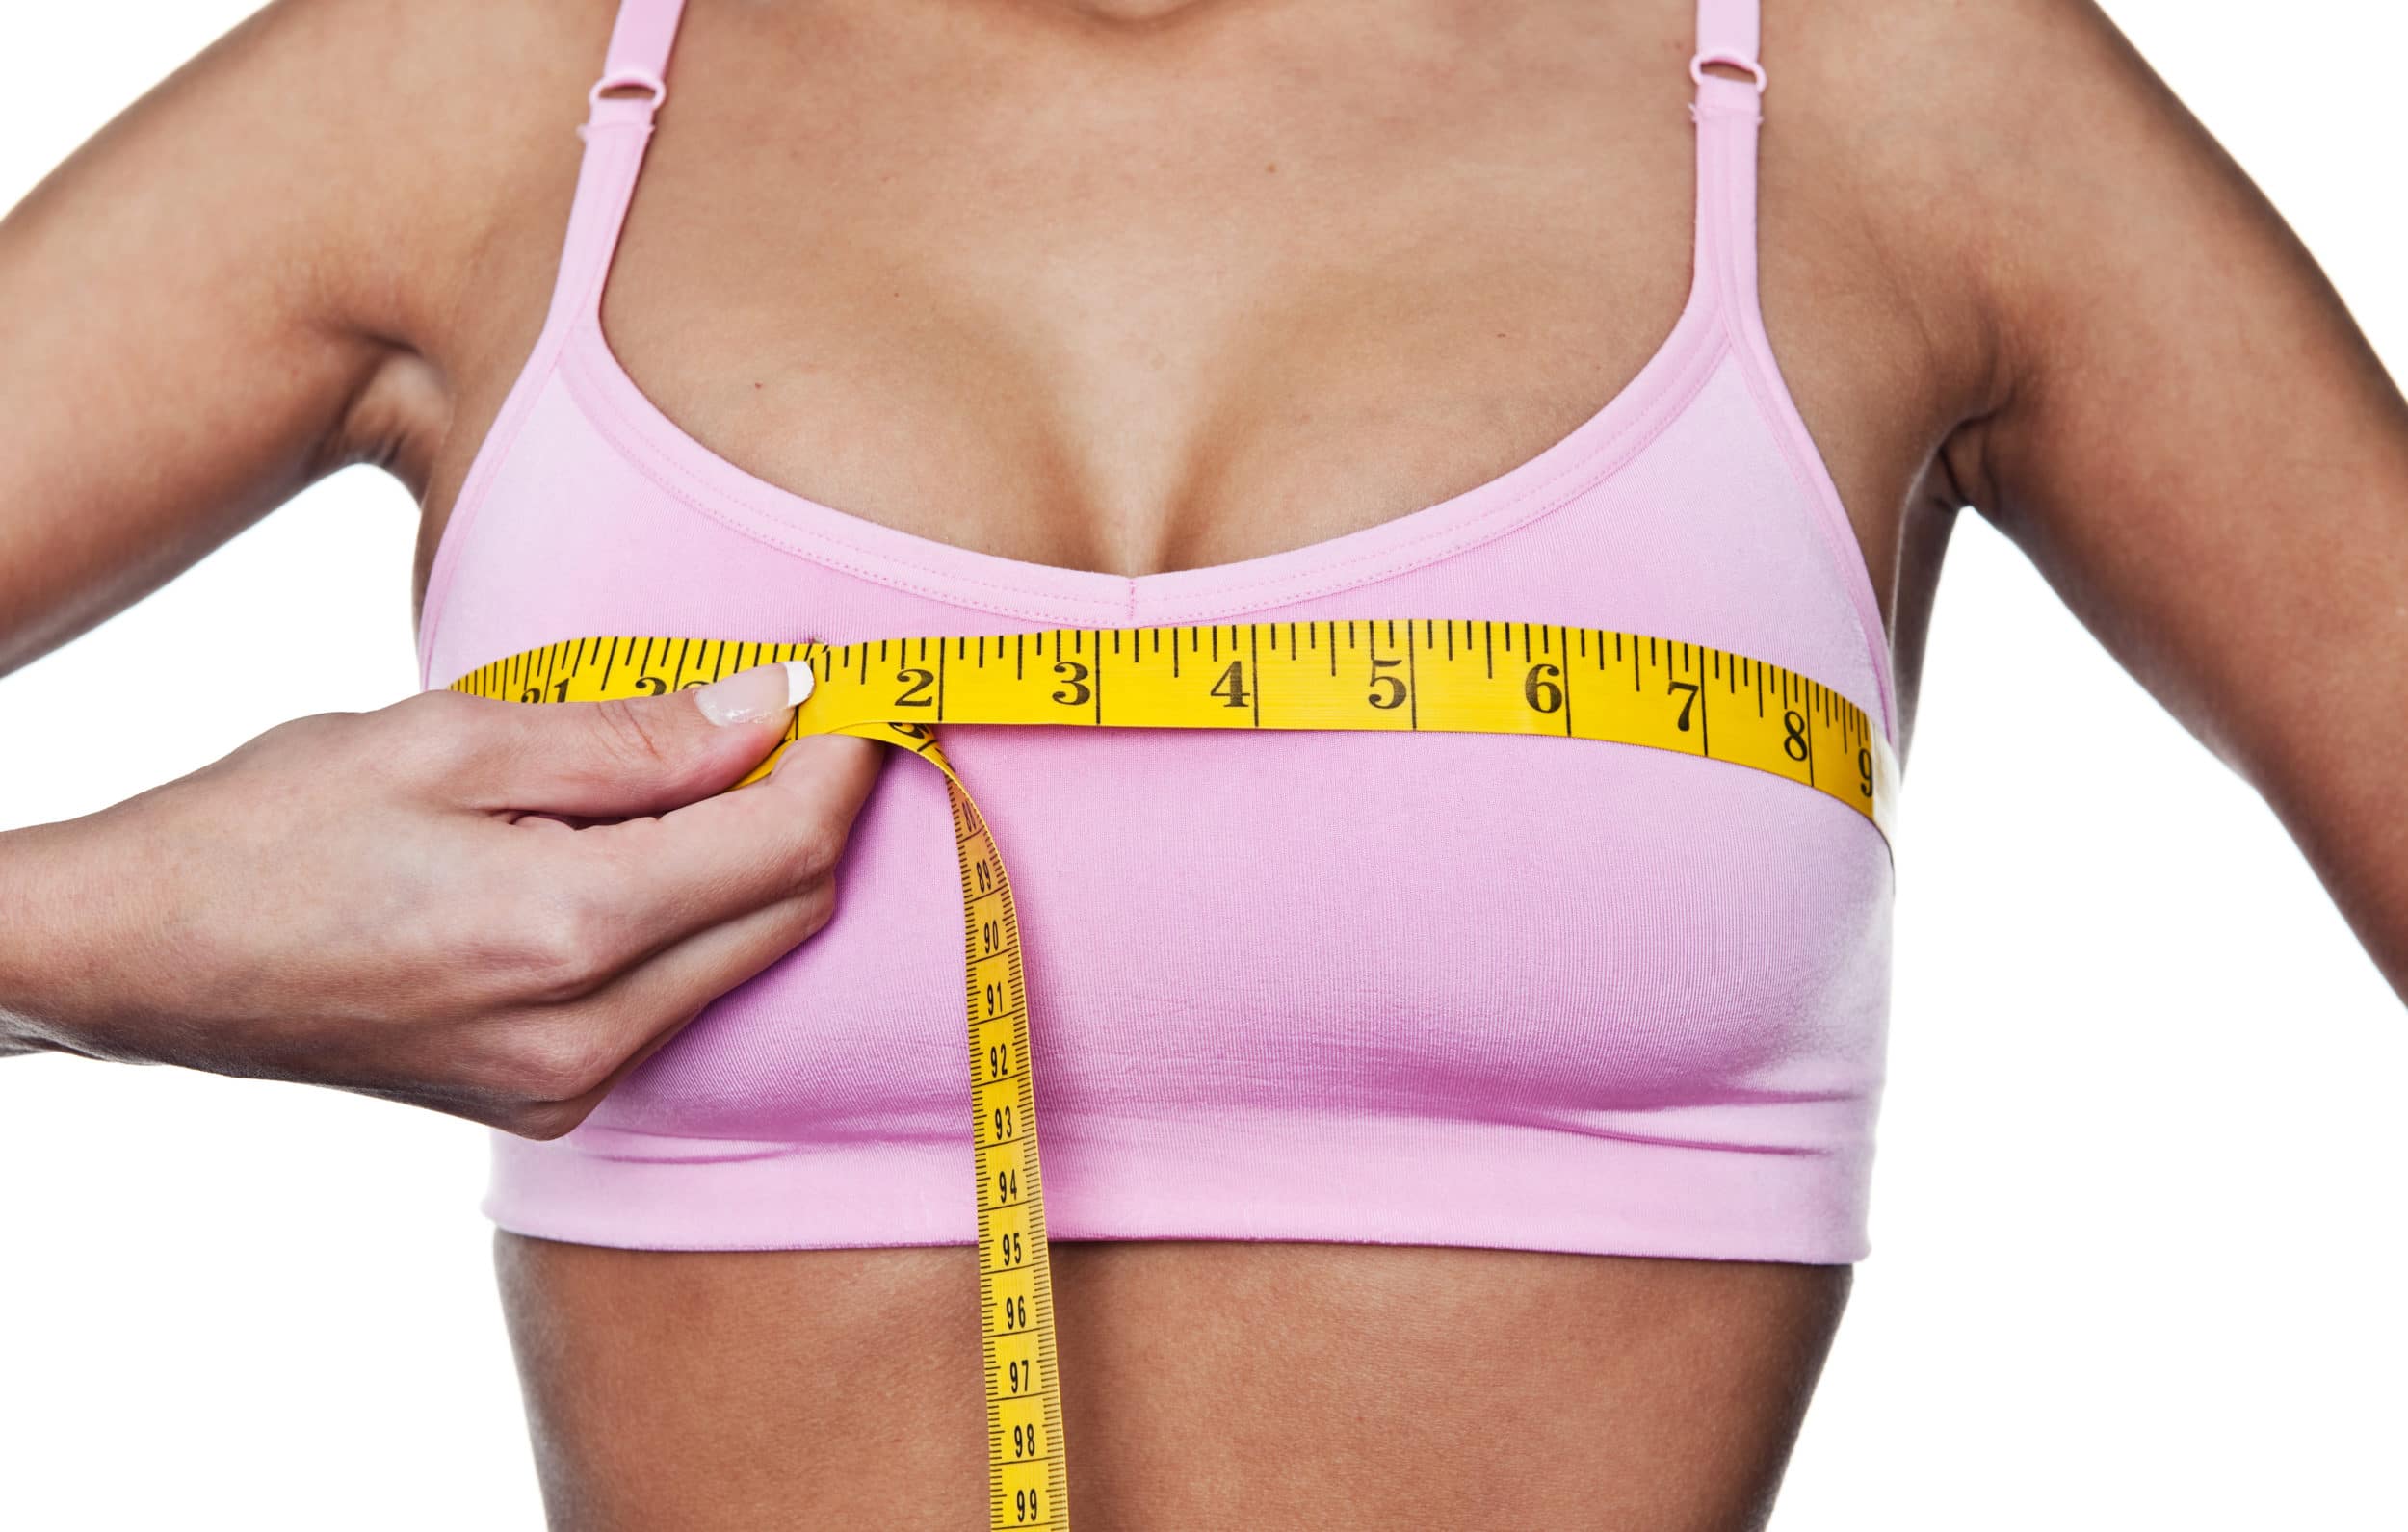 Woman in pink bra measuring her chest with a tape measure